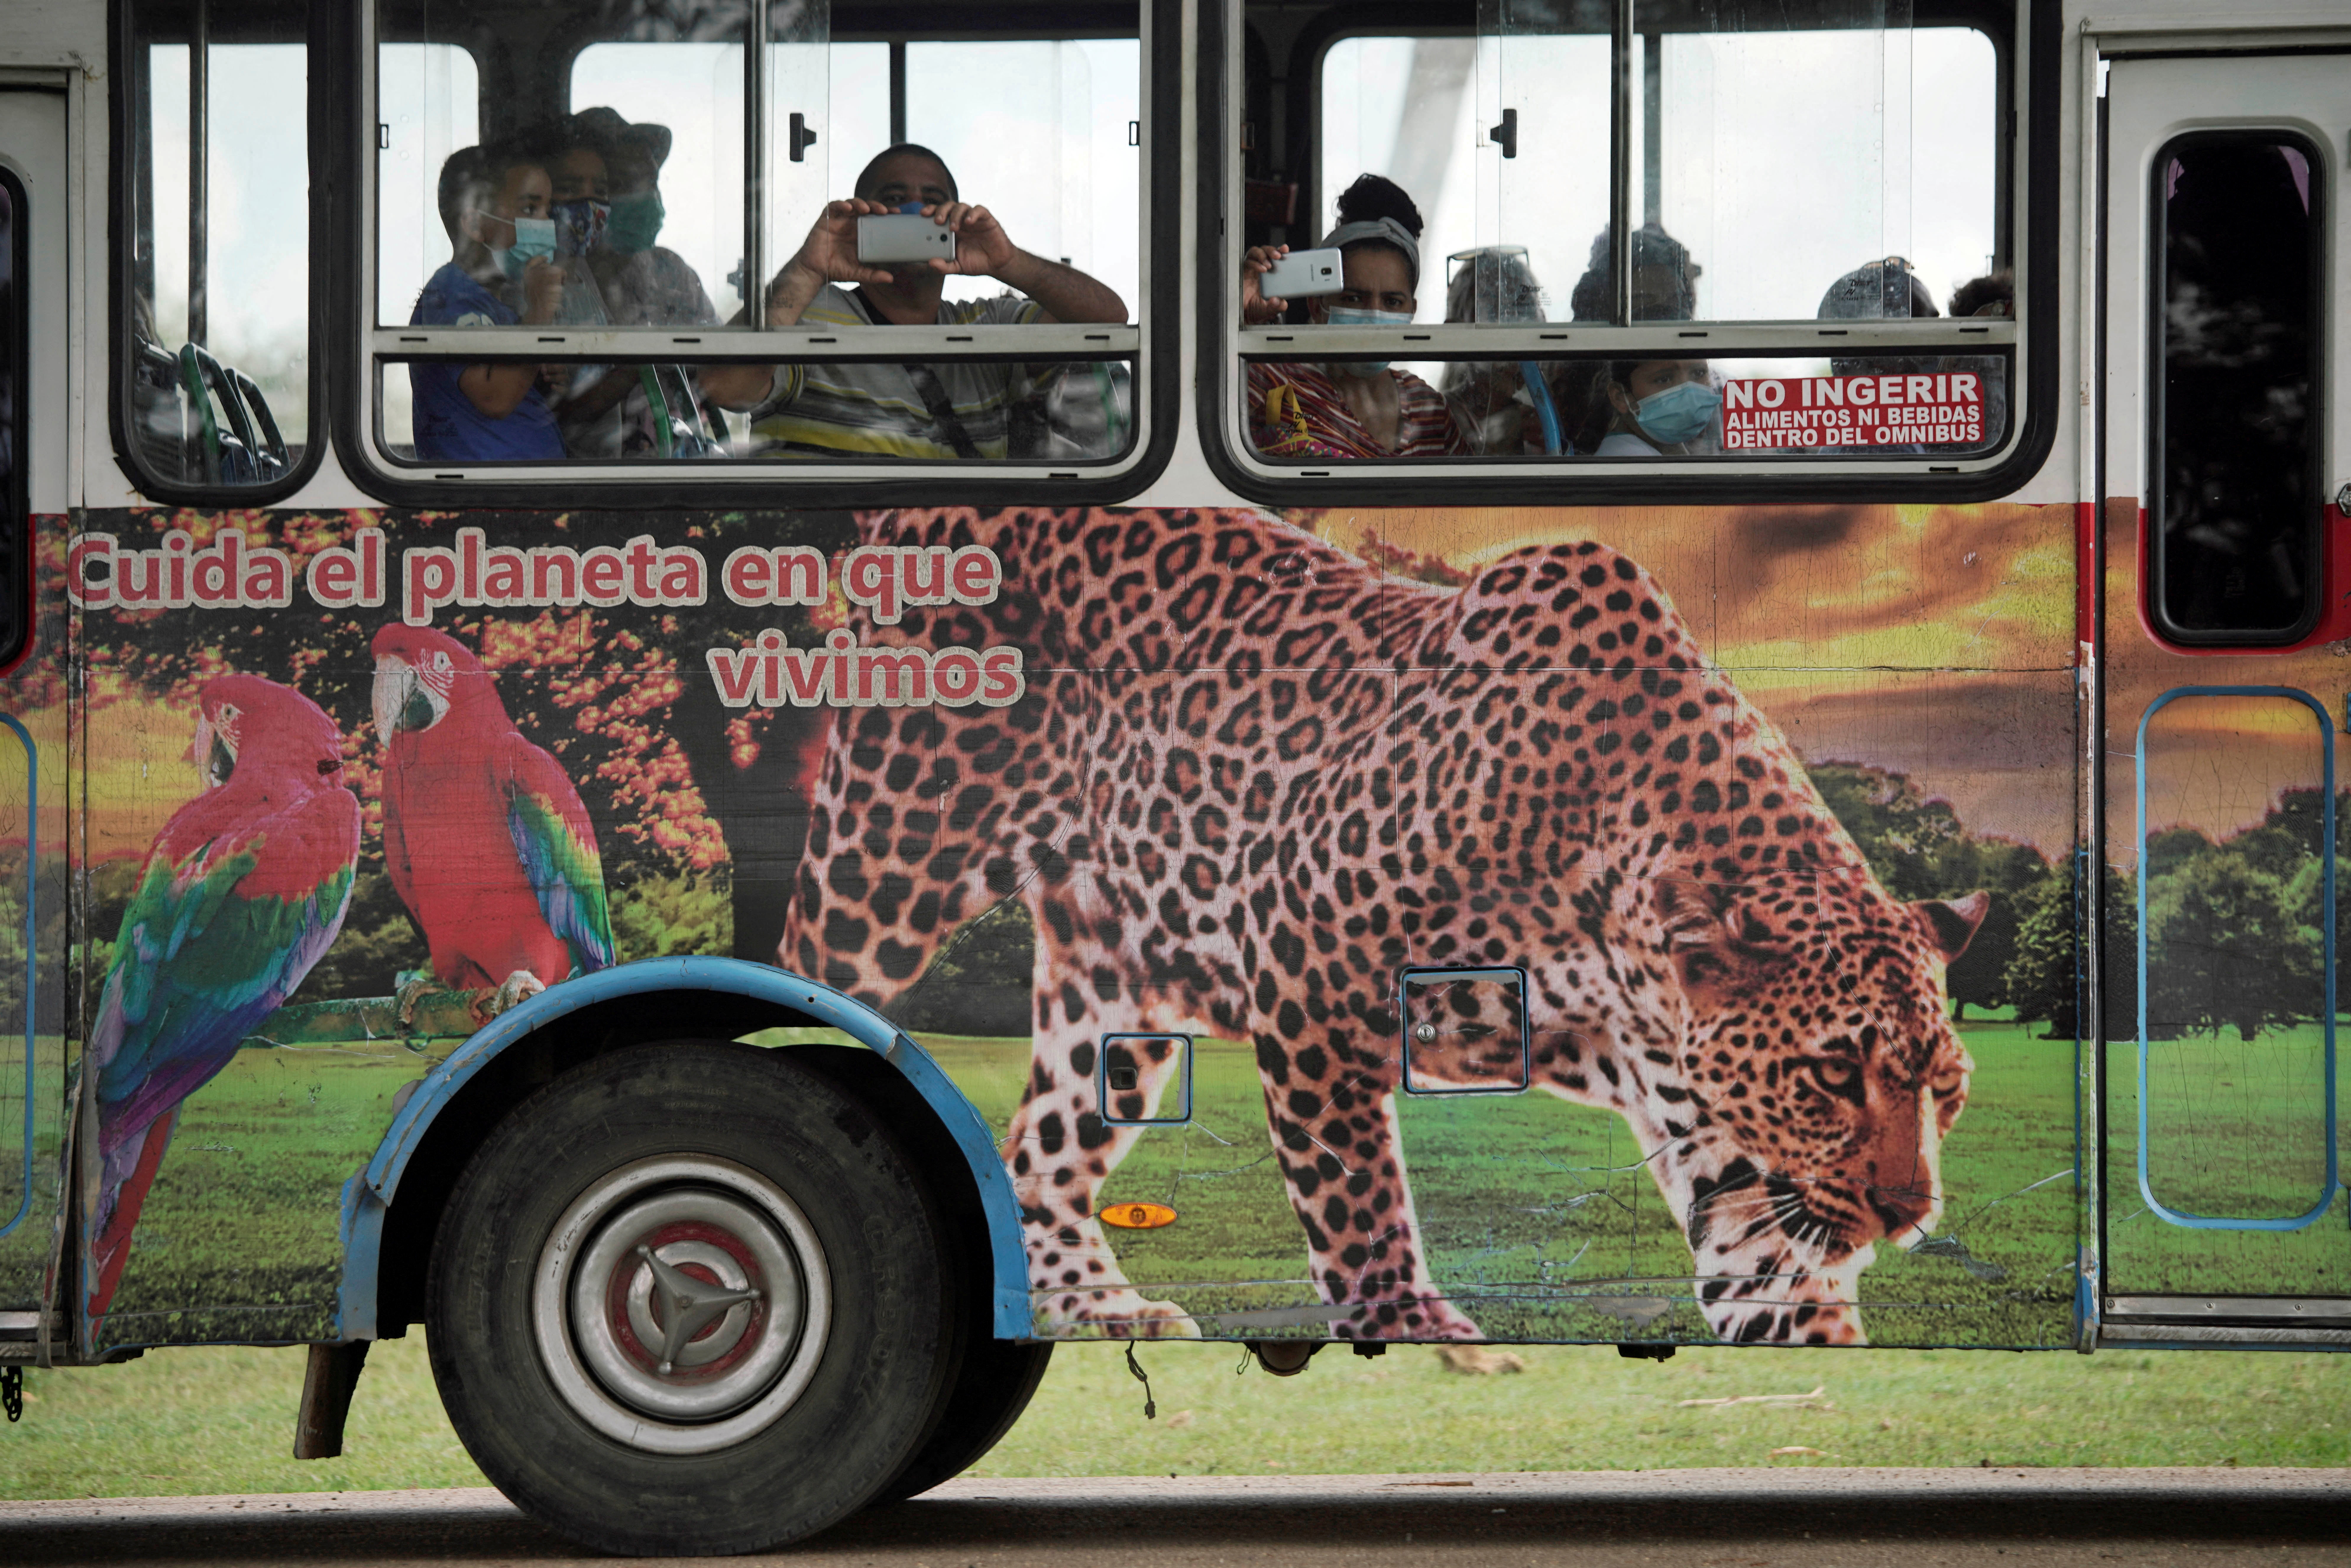 Visitors take pictures at the zoo in Havana